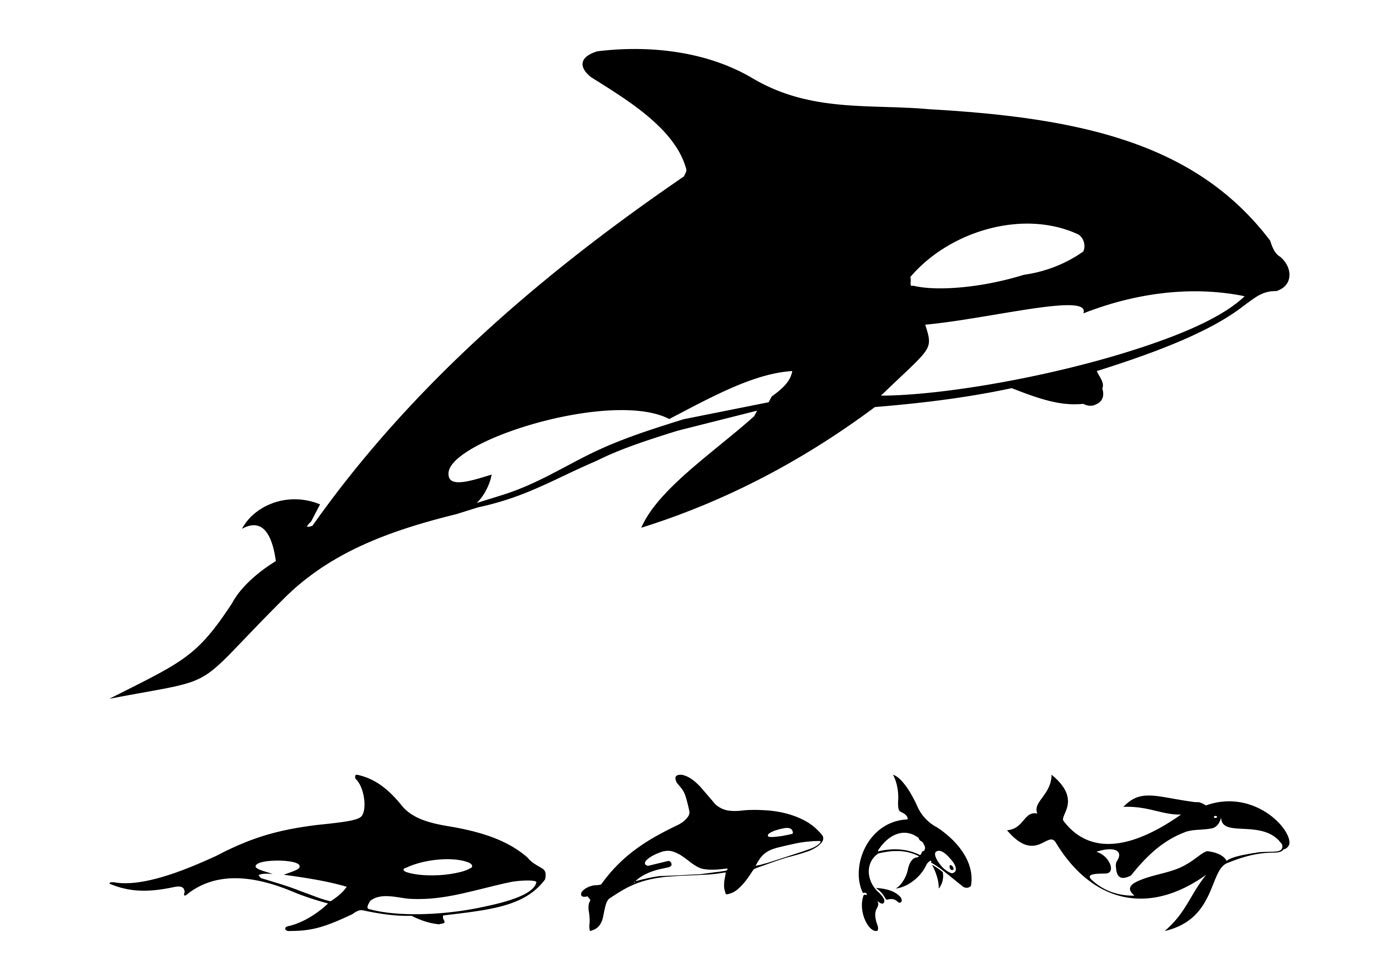 Whale Free Vector Art - (1403 Free Downloads)